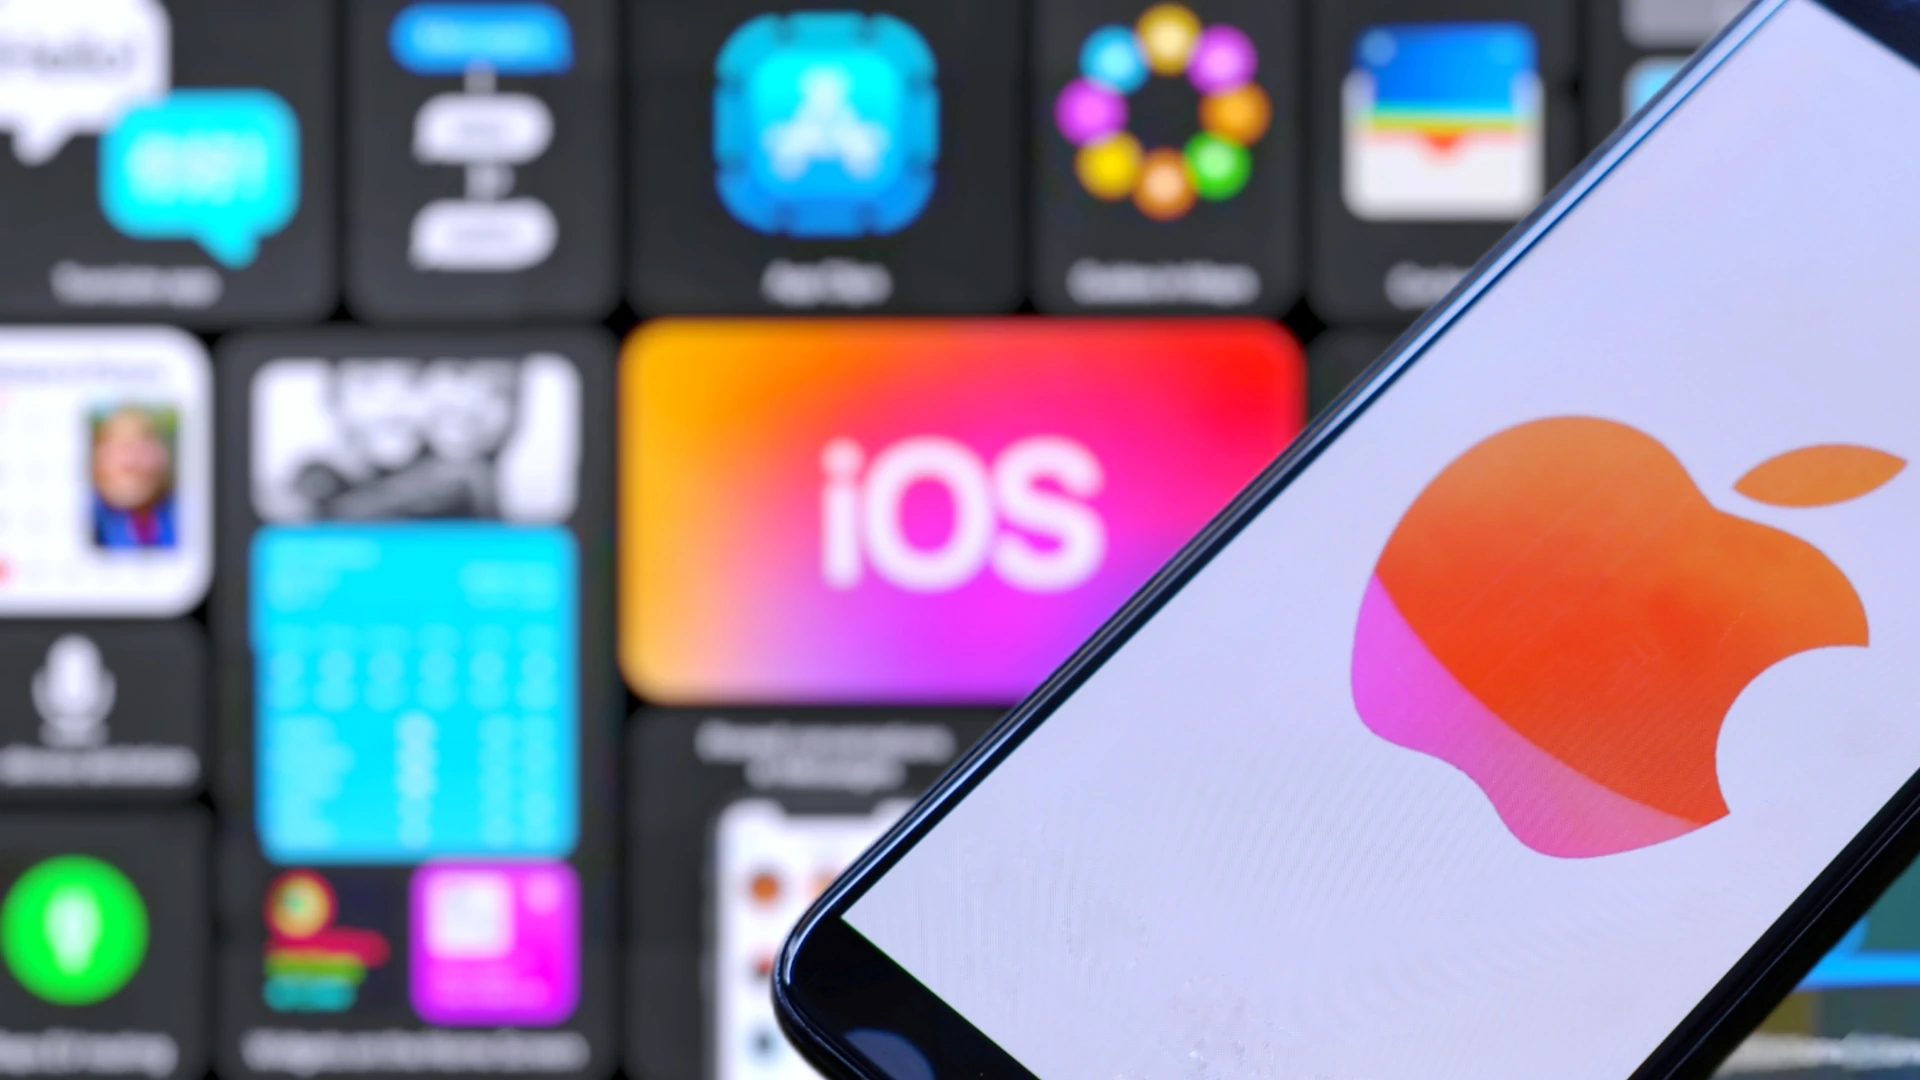 iOS 18 will reportedly be Apple’s biggest update since the launch of the first iPhone